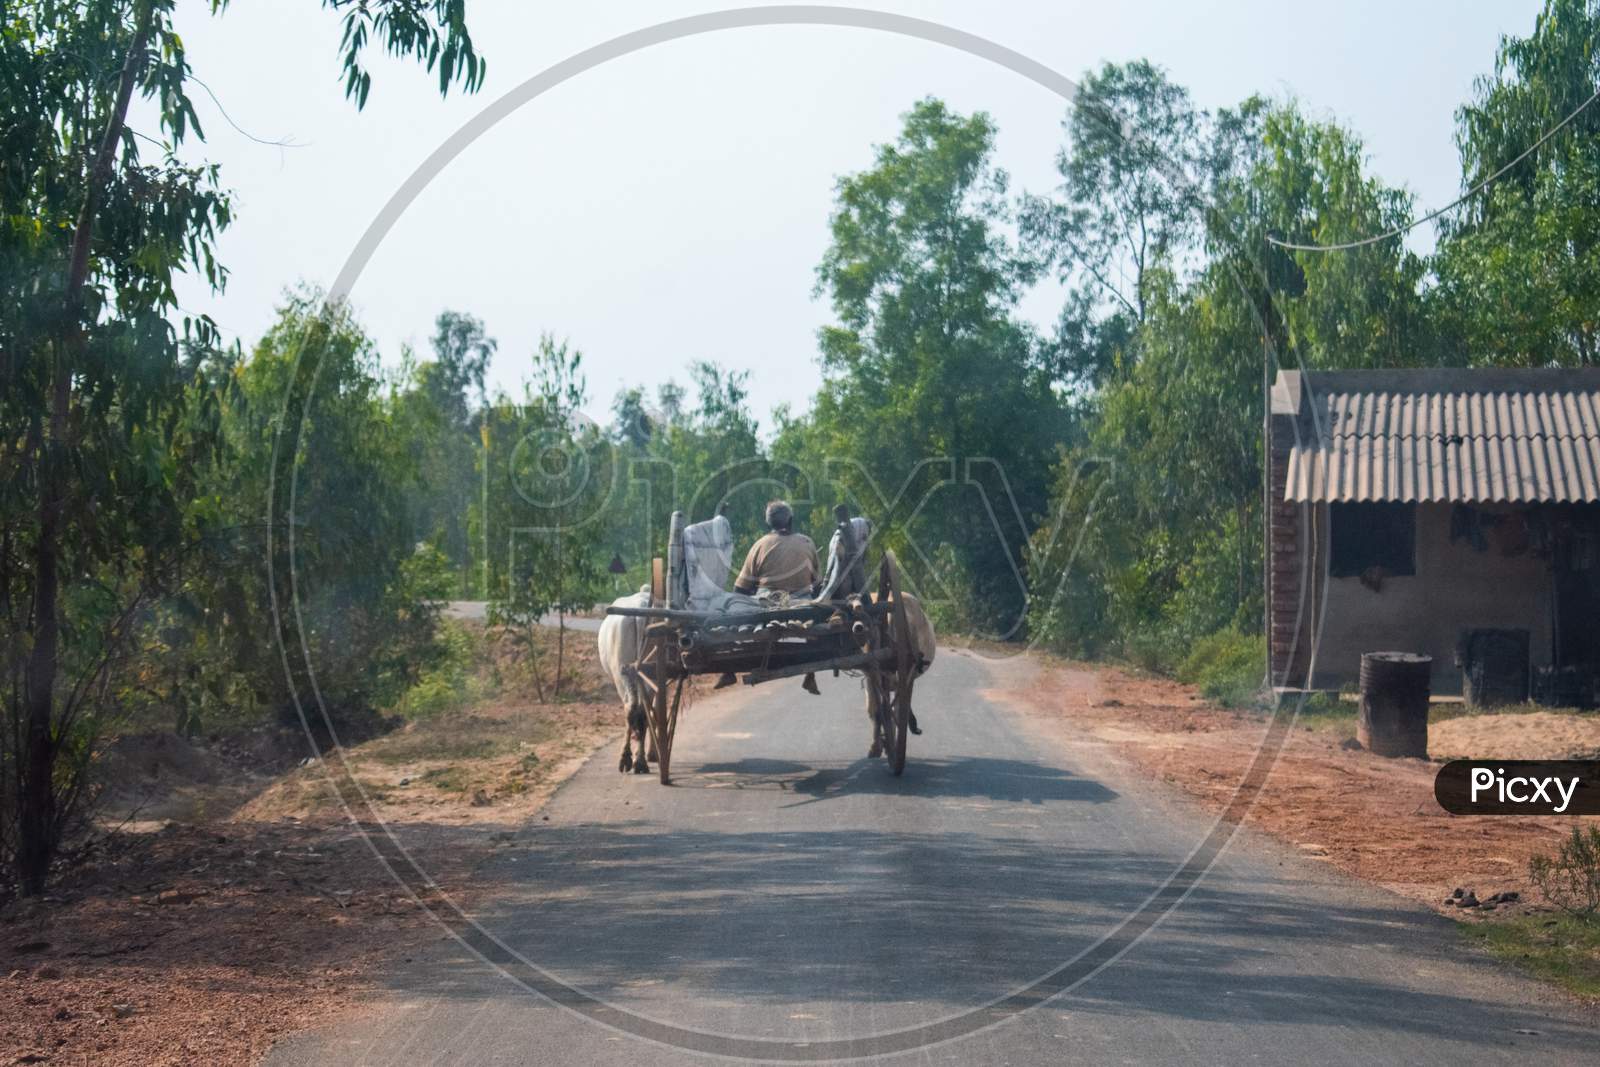 Image Of A Bullock Cart Moving In A Road Captured From Behind.